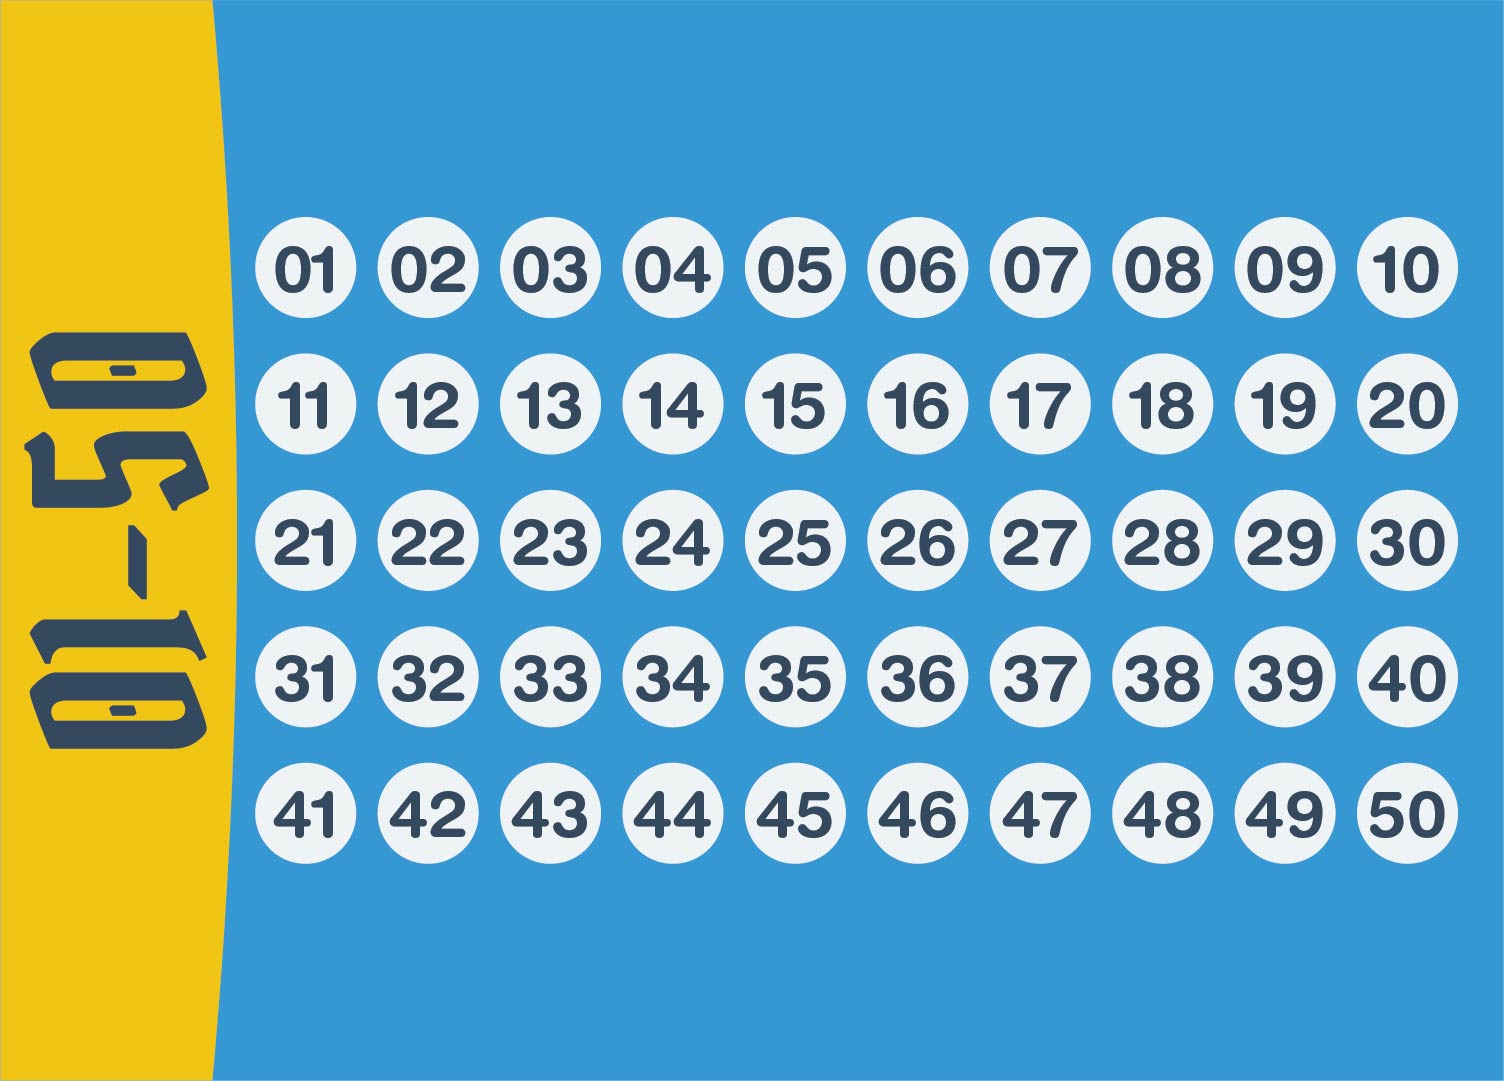 9 Best Images of Printable Numbers - 50 - Printable Number Chart  50 .